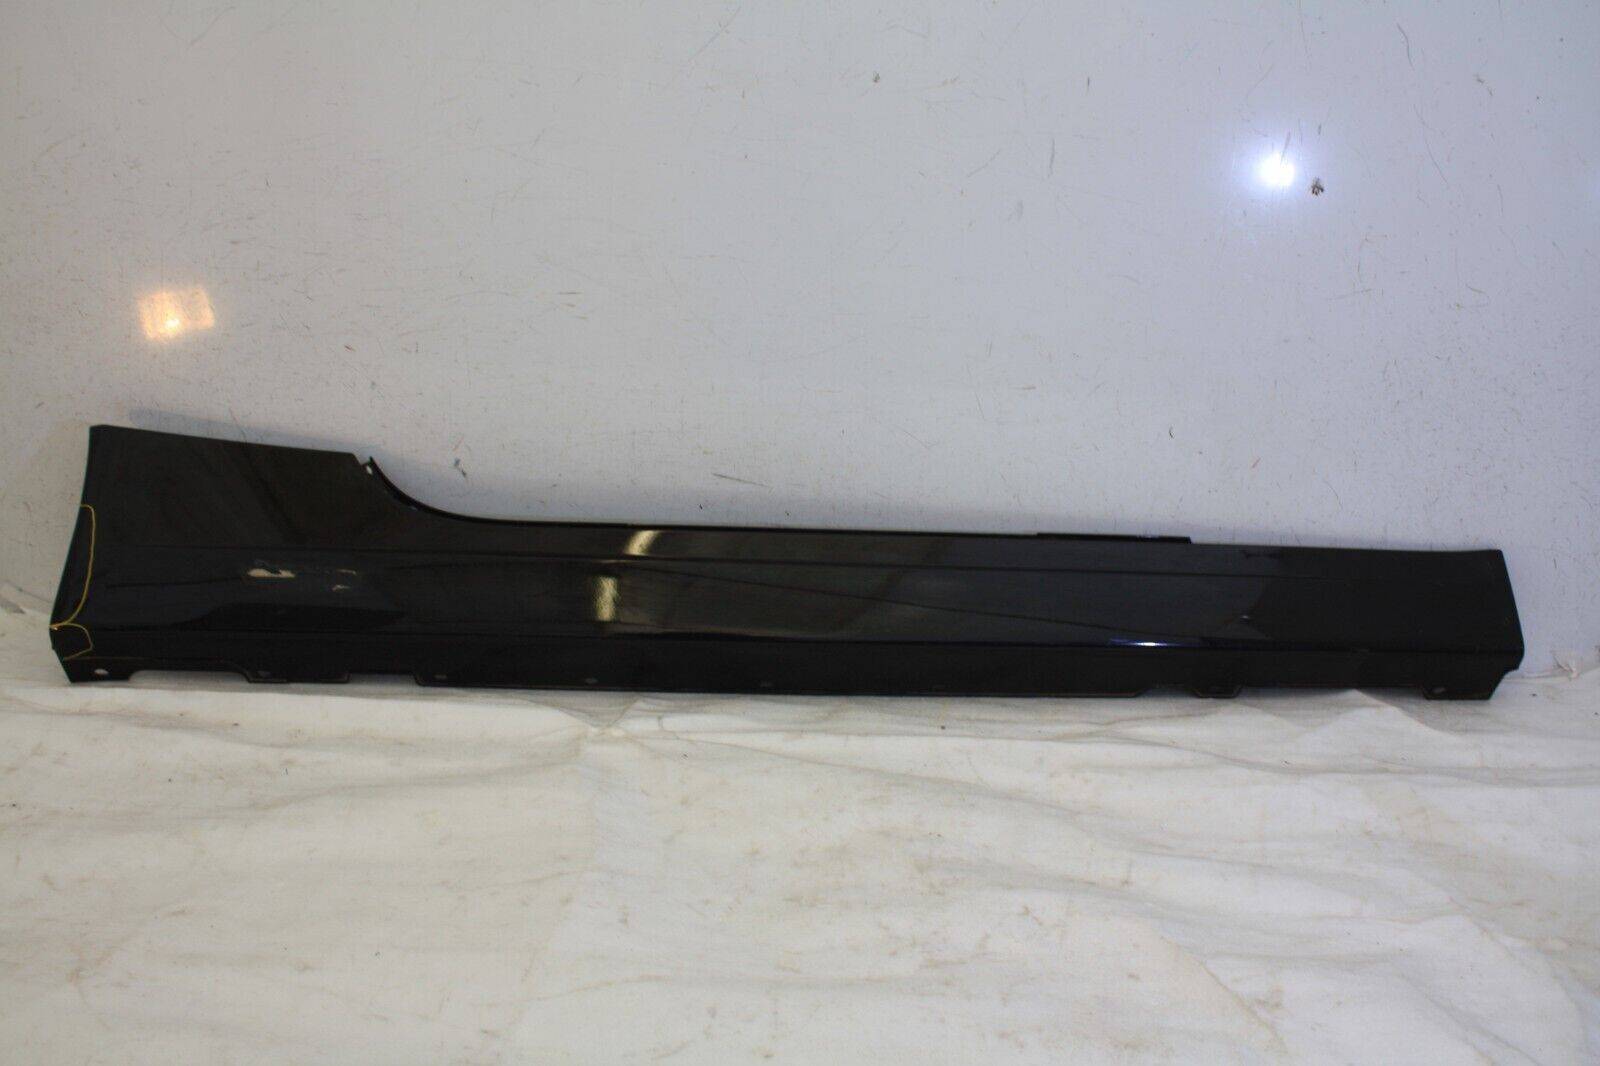 Jaguar XK Right Side Skirt 2006 TO 2009 6W83 10154 A Genuine SEE PICS 176204486572